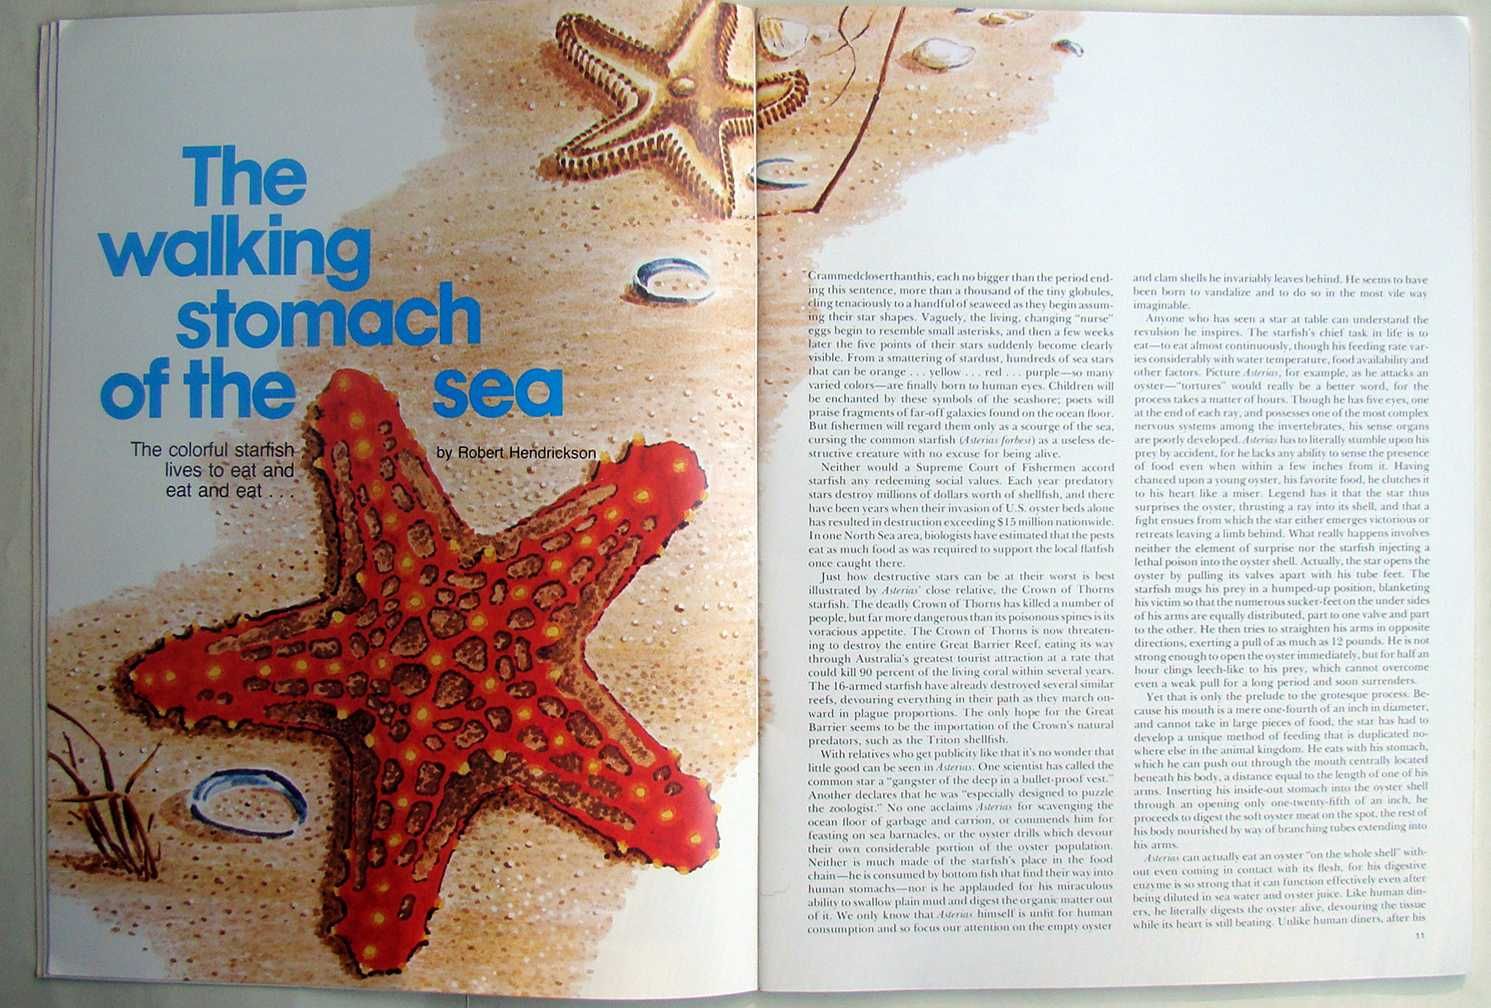 The Compass. A Magazine of the Sea